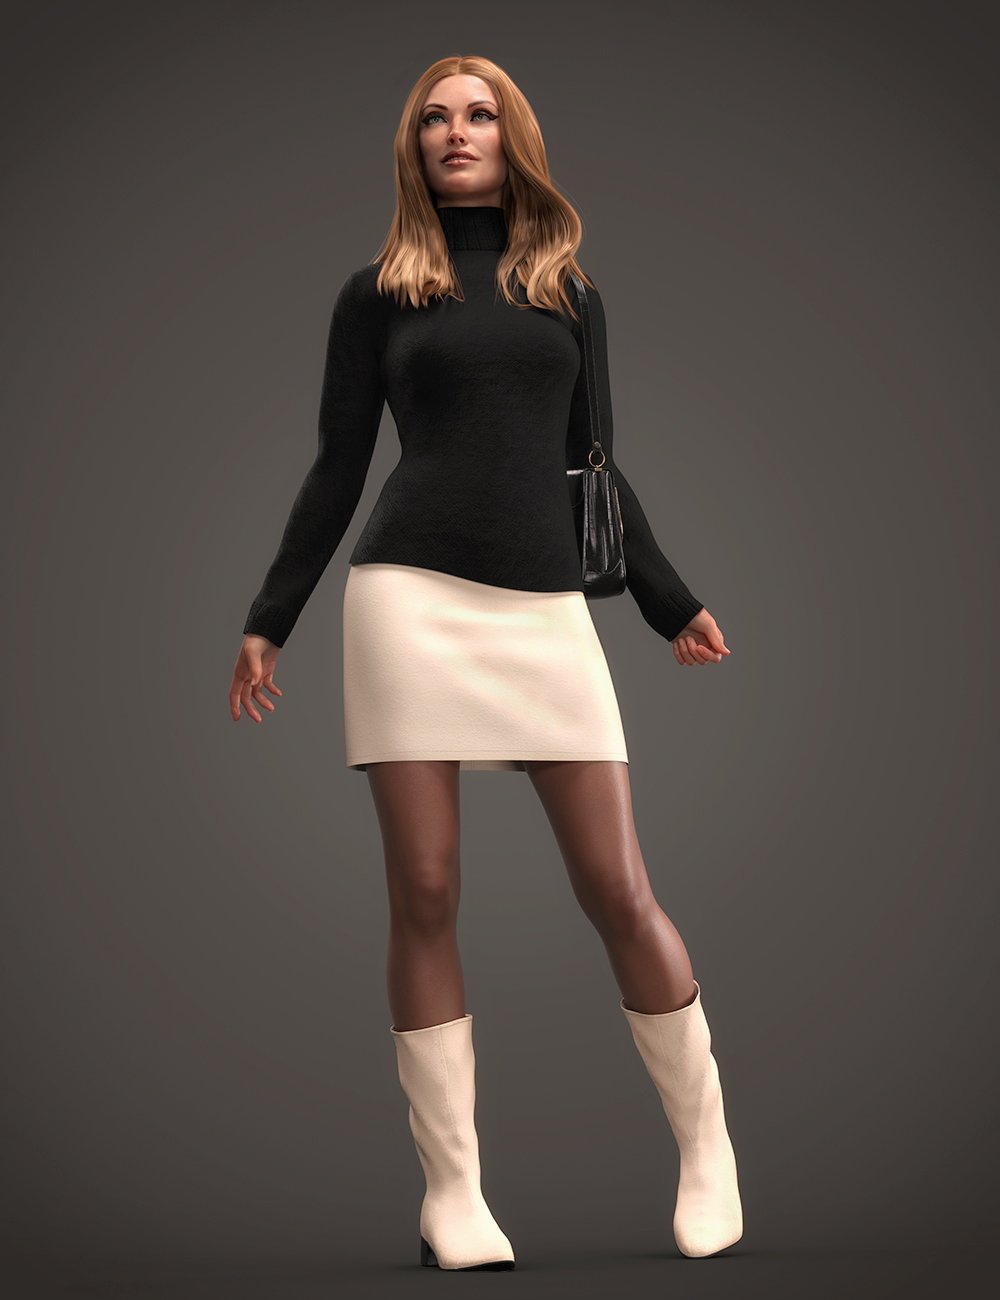 Bunny Dreams Outfit for Genesis 8 and 8.1 Females by: Barbara BrundonUmblefuglySadeMoonscape Graphics, 3D Models by Daz 3D